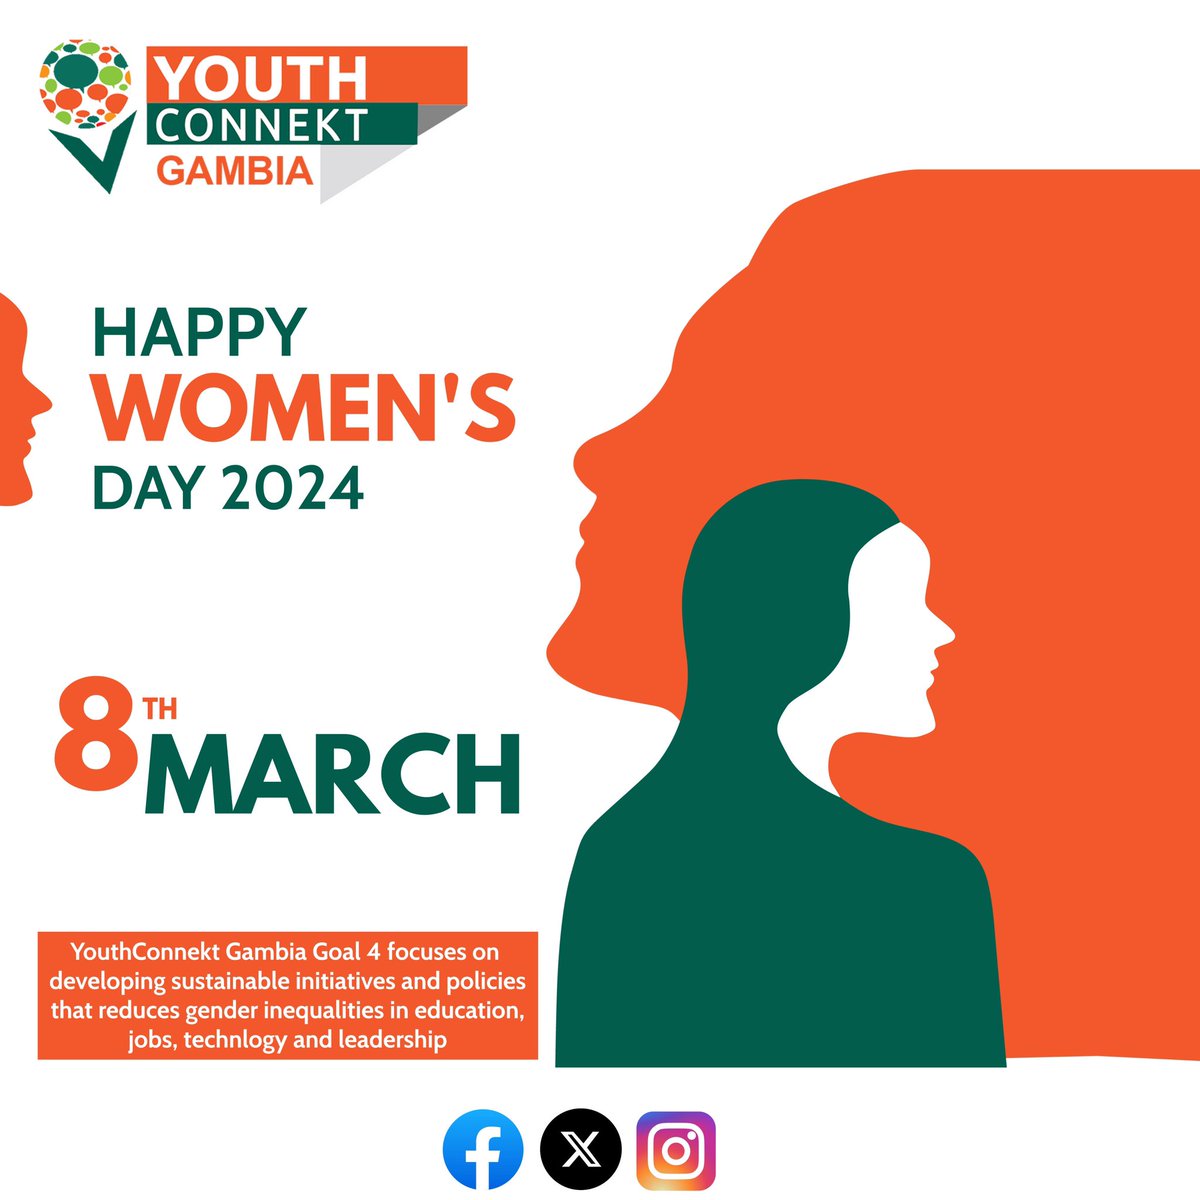 Youthconnekt Gambia wishes every woman a happy international women’s day.

@YouthConnektAf 
@GambiaNYC 
#IWD2024